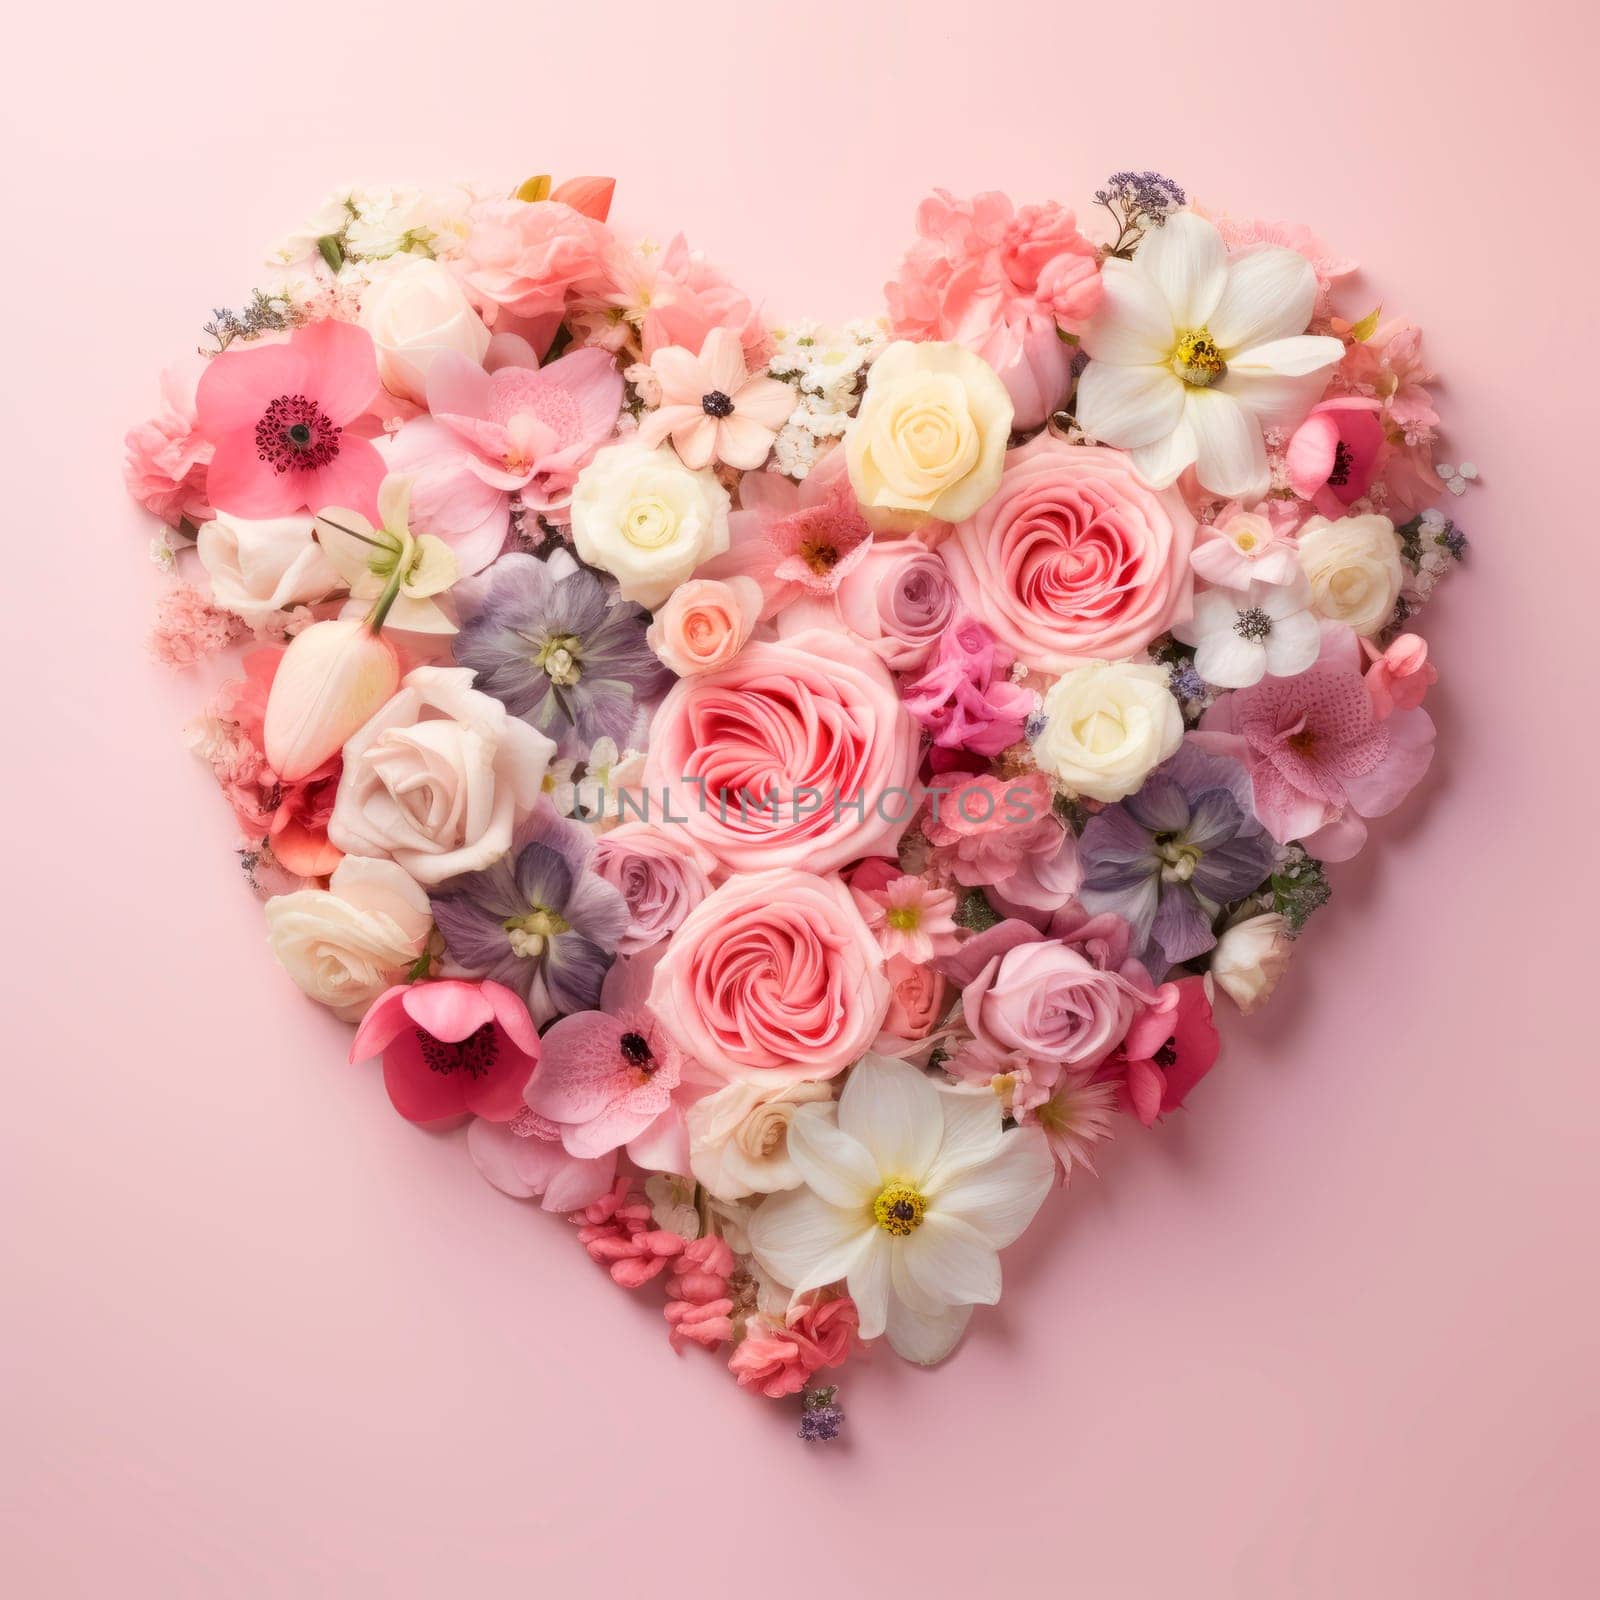 The heart is lined with beautiful pink and white flowers on a pink background by Spirina